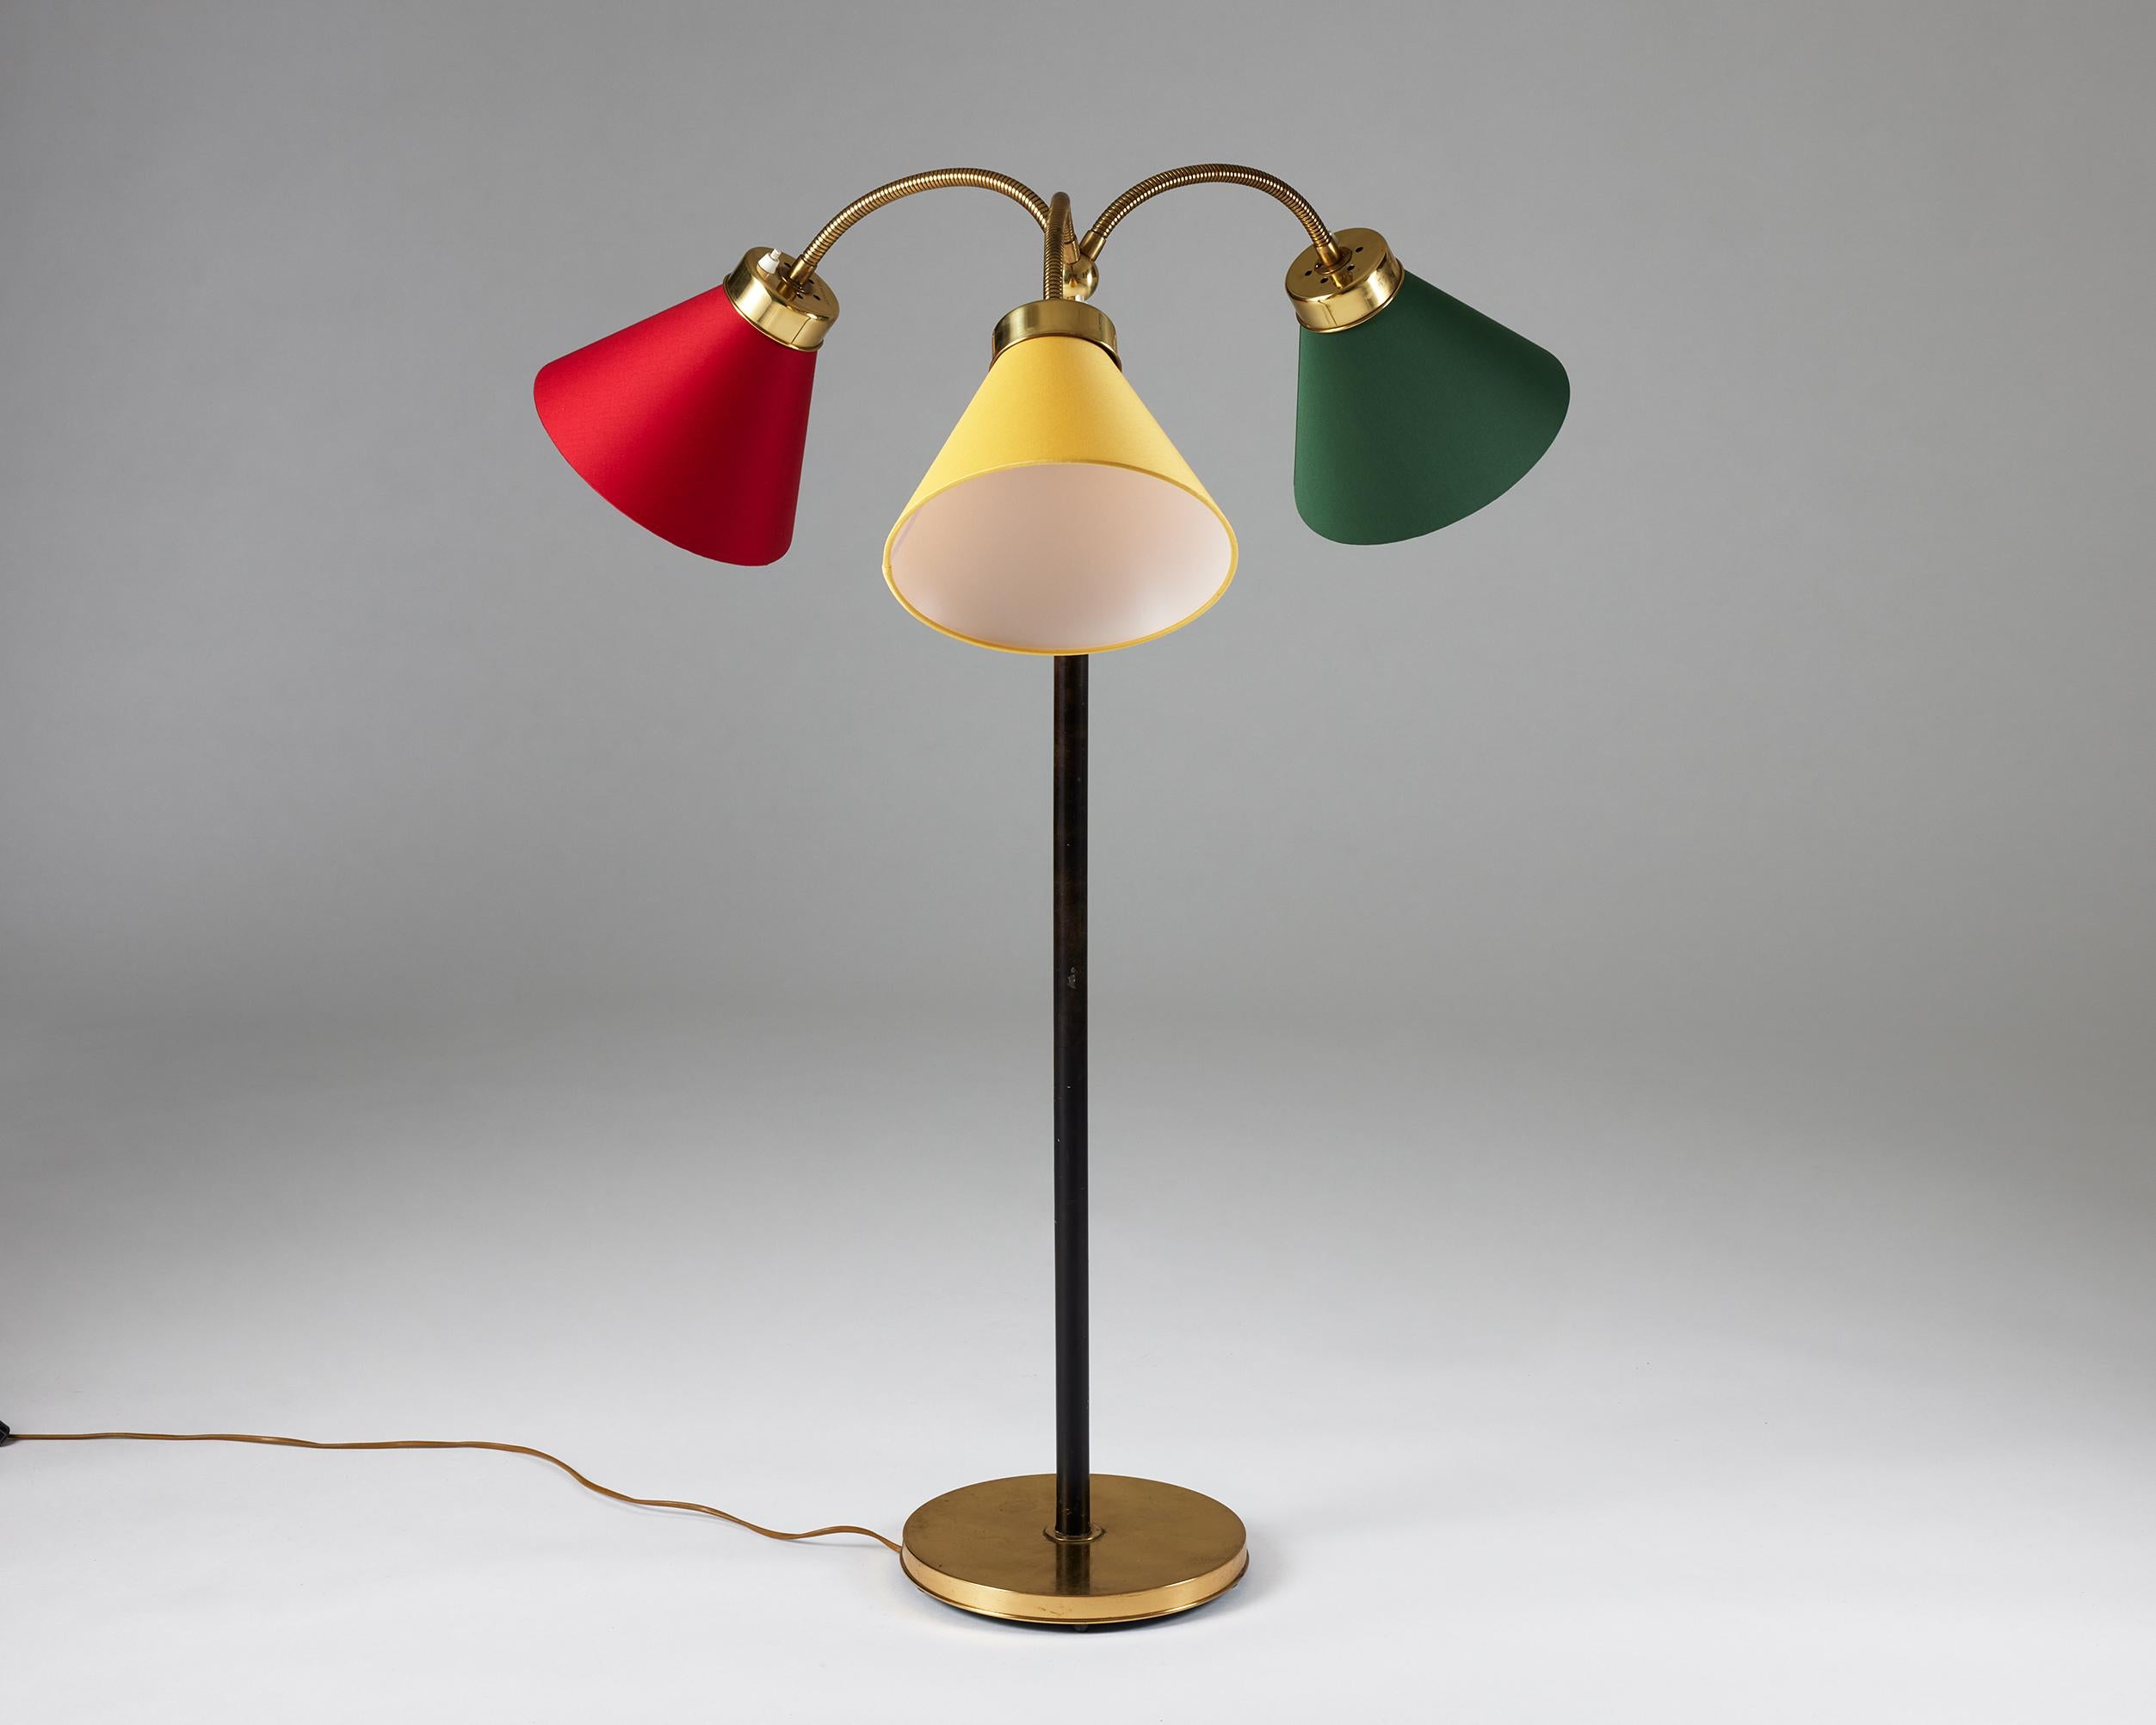 Floor lamp ‘San Francisco’ model G2431 designed by Josef Frank for Svenskt Tenn,
Sweden, 1938.

Early model with leather clad stem and fabric shades.

Stamped.

Exhibition: Model shown at the Golden Gate Exhibition in San Francisco, 1939.

H: 105 cm